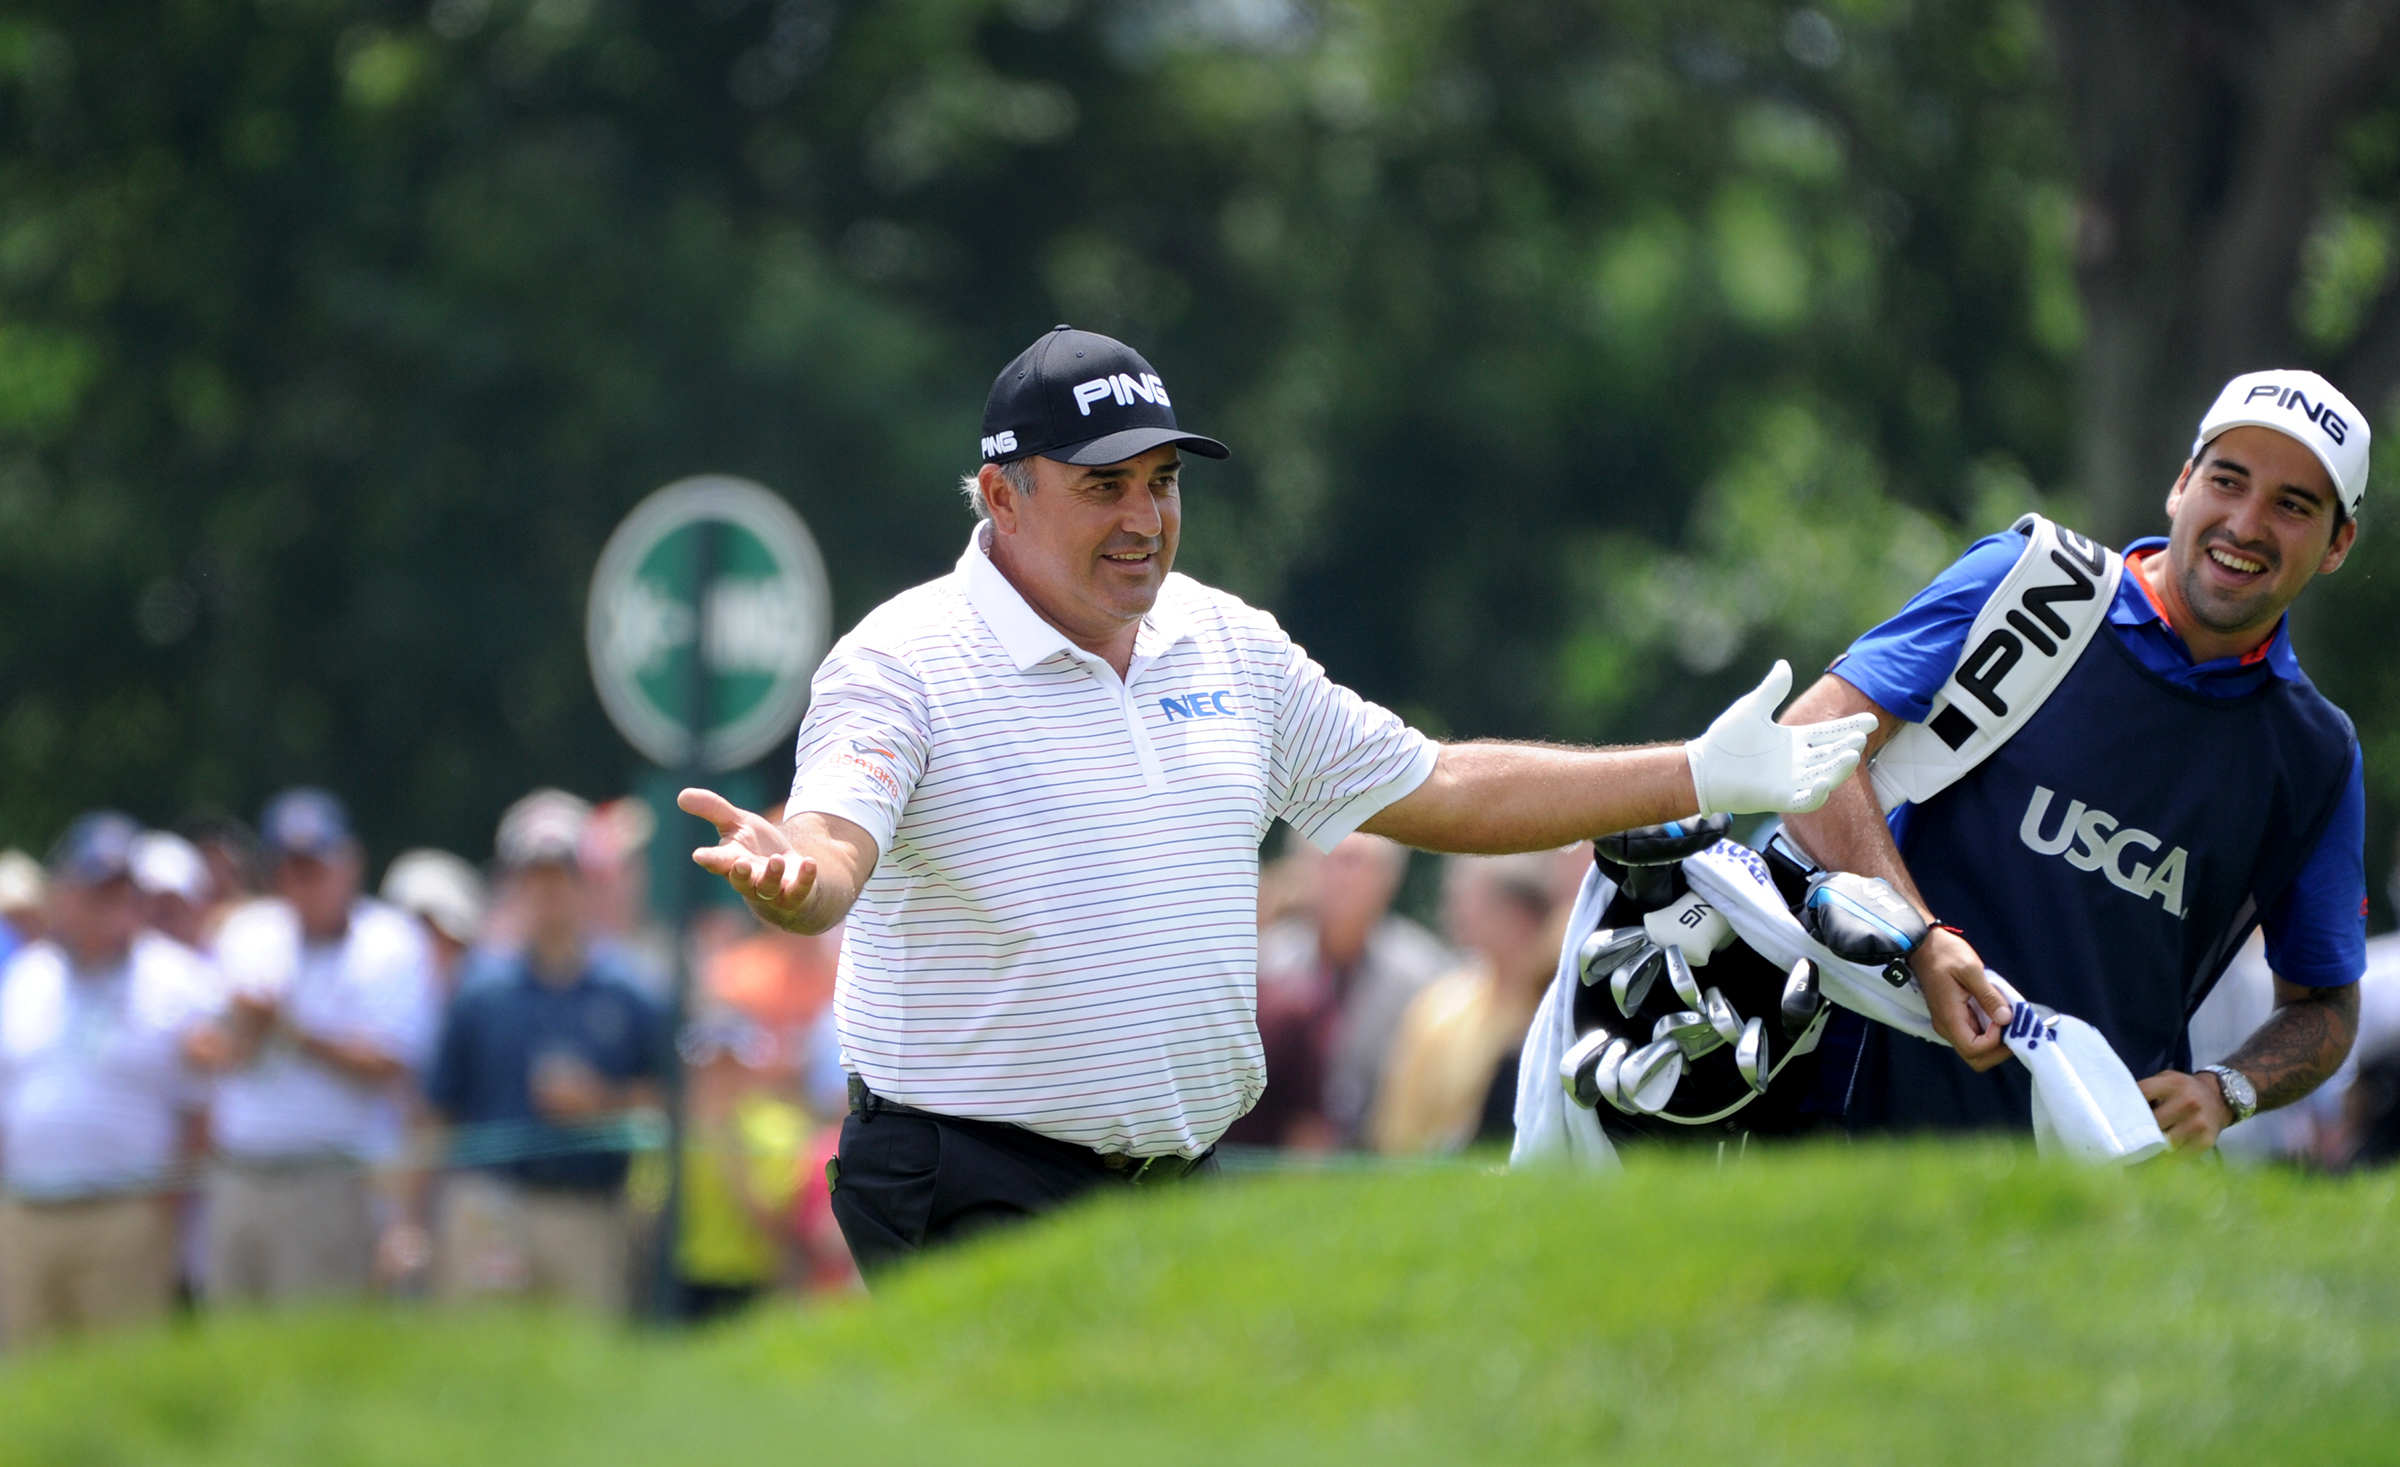 Angel Cabrera welcomes cheers from spectators after hitting a birdie on the 11th hole Friday at Oakmont. (Lake Fong/Post-Gazette)